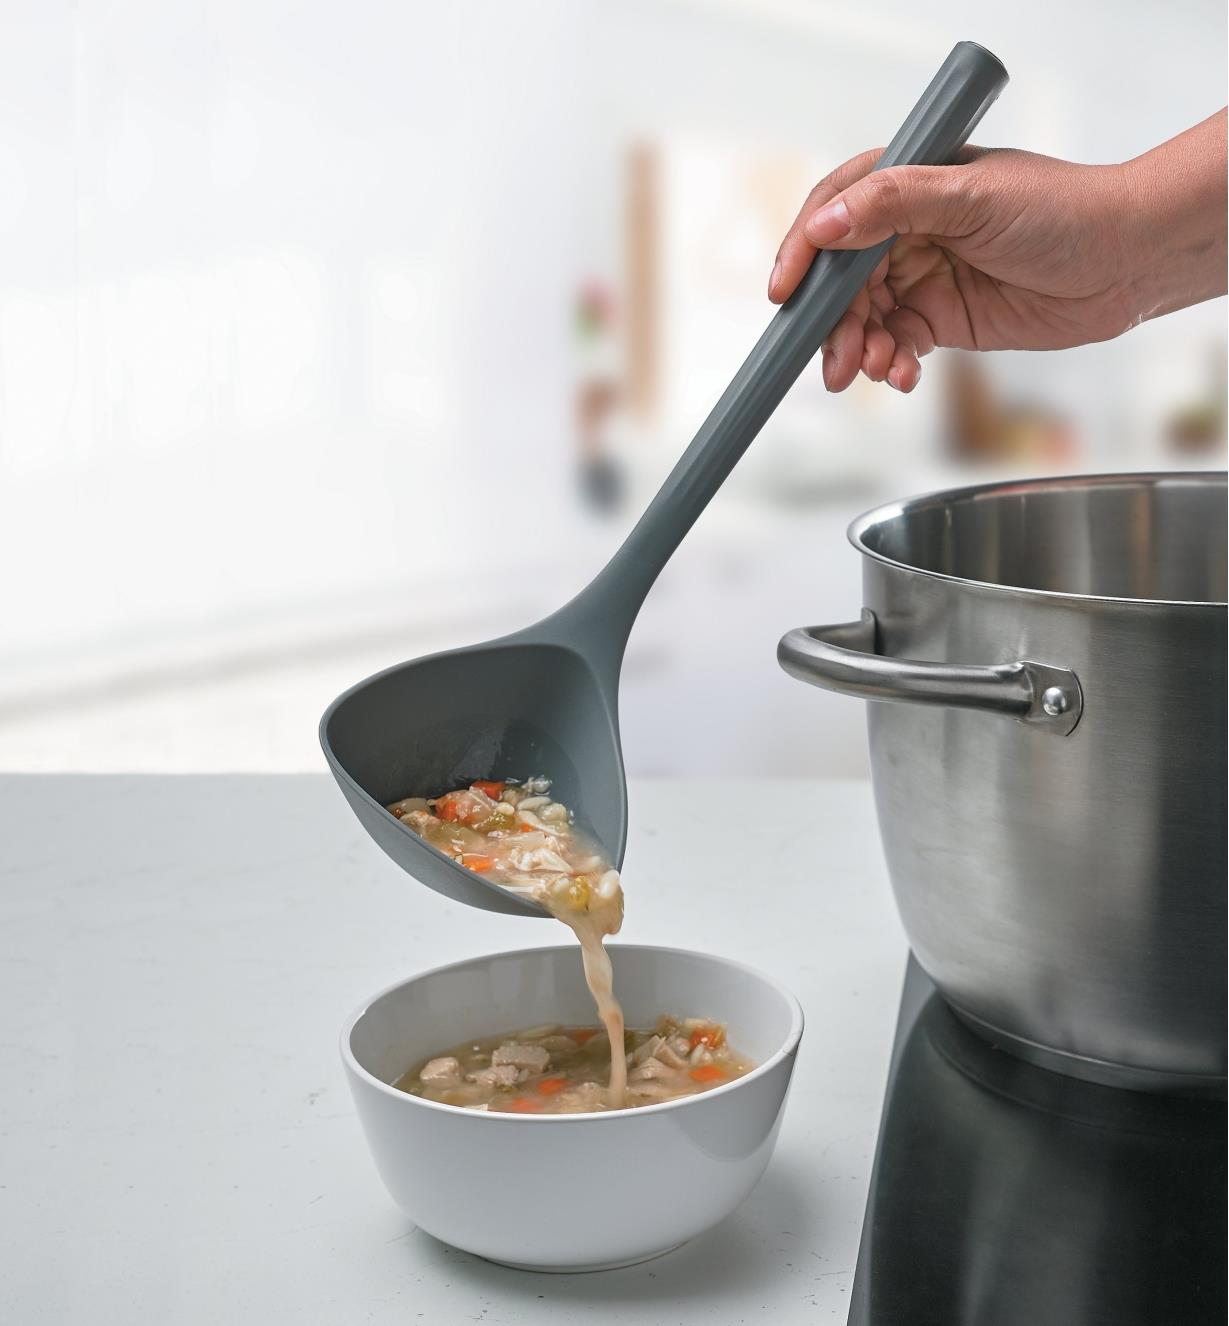 Using the Nylon Ladle to transfer soup from a pot into a bowl